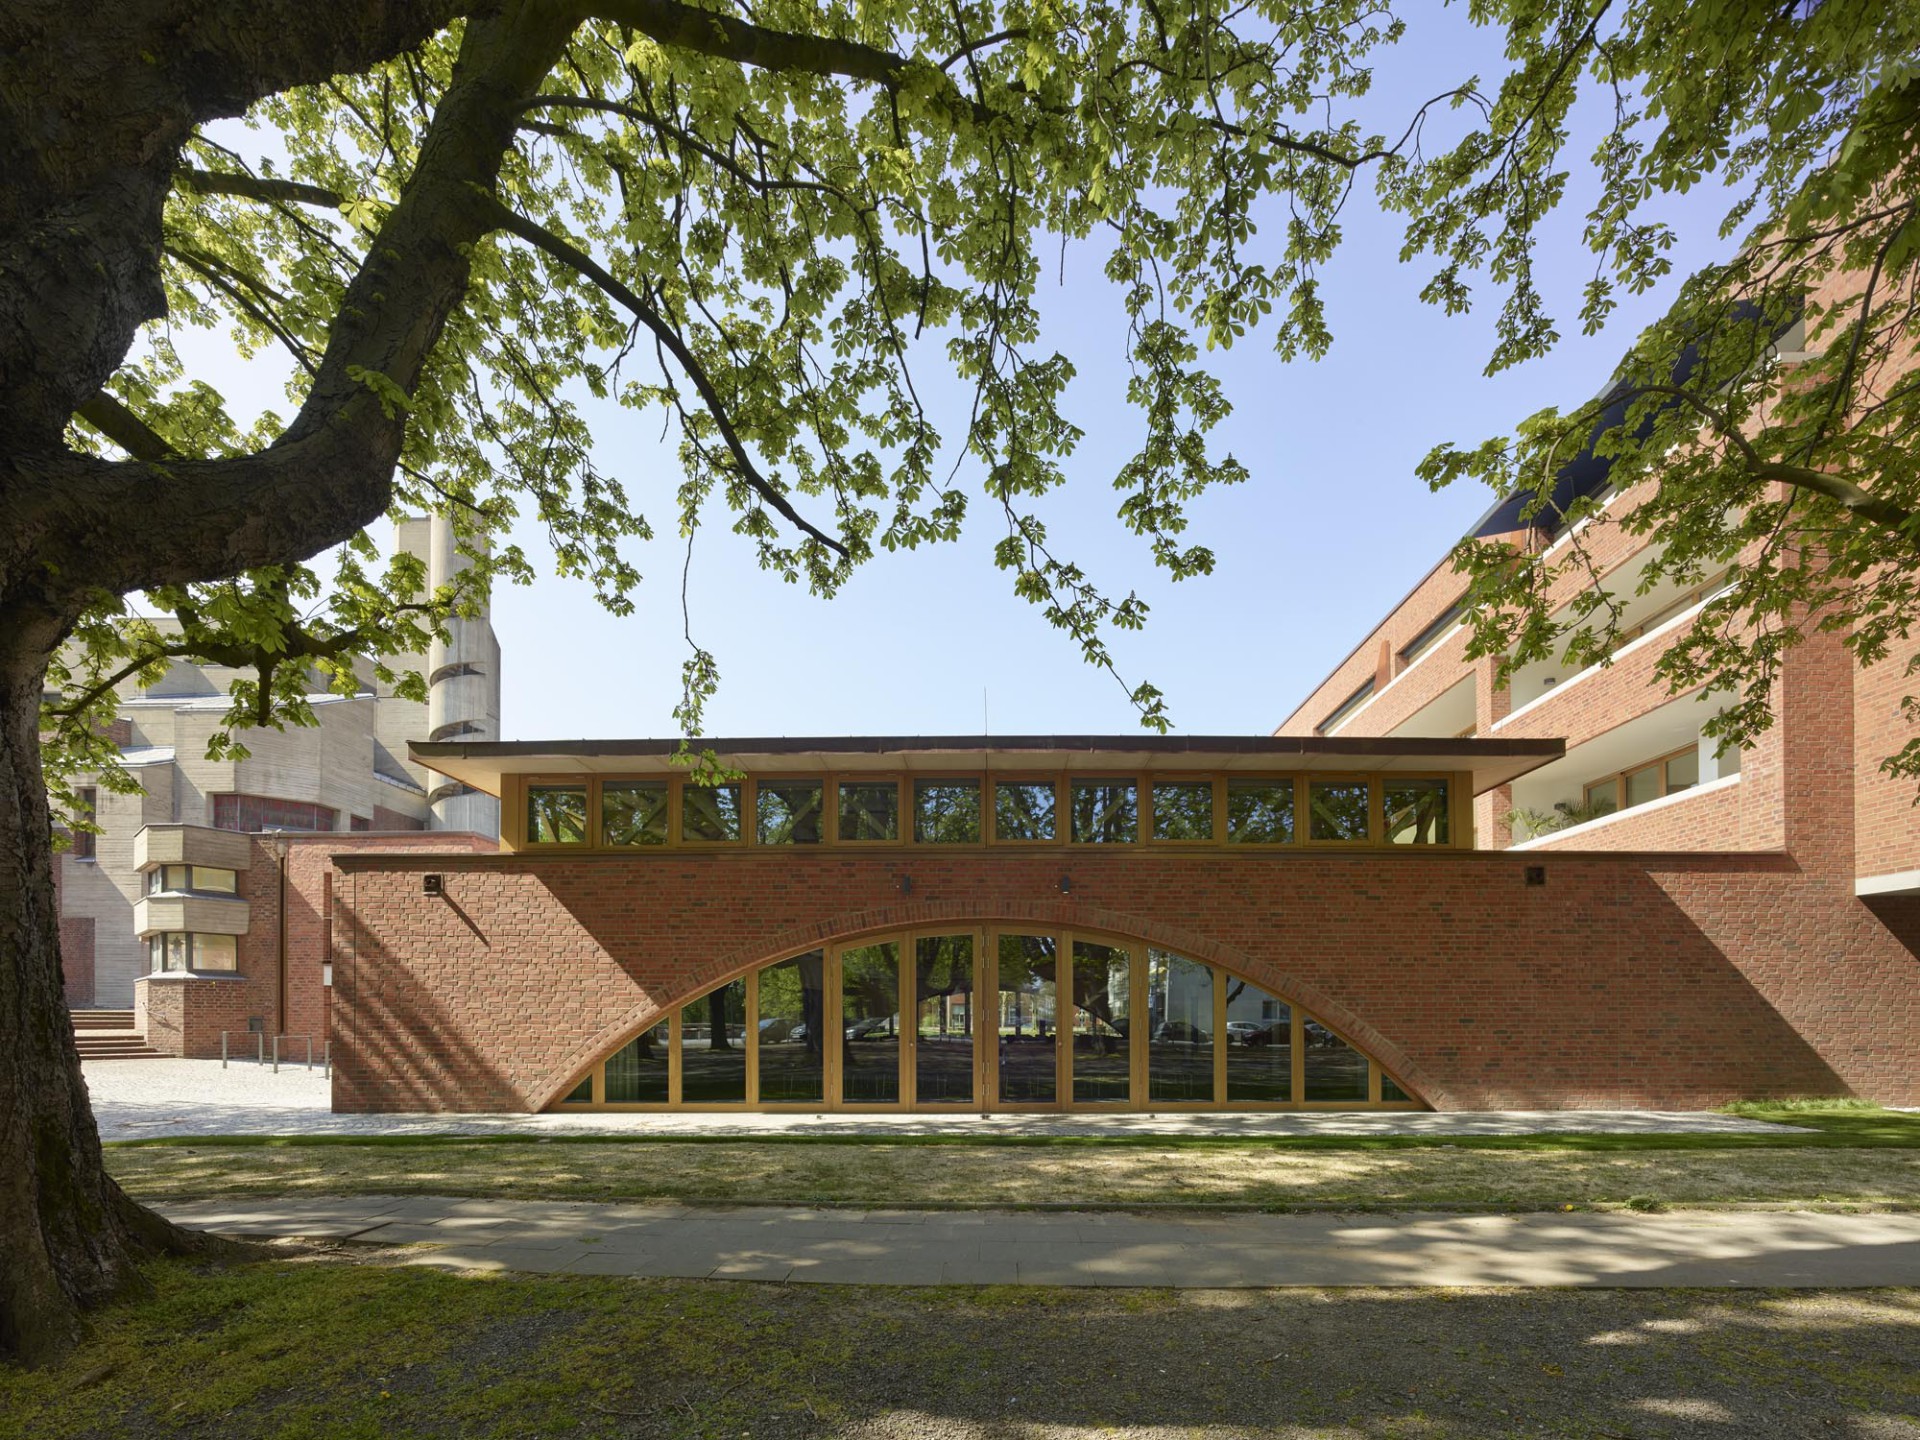 School Annex and Housing, Cologne-Lindenthal